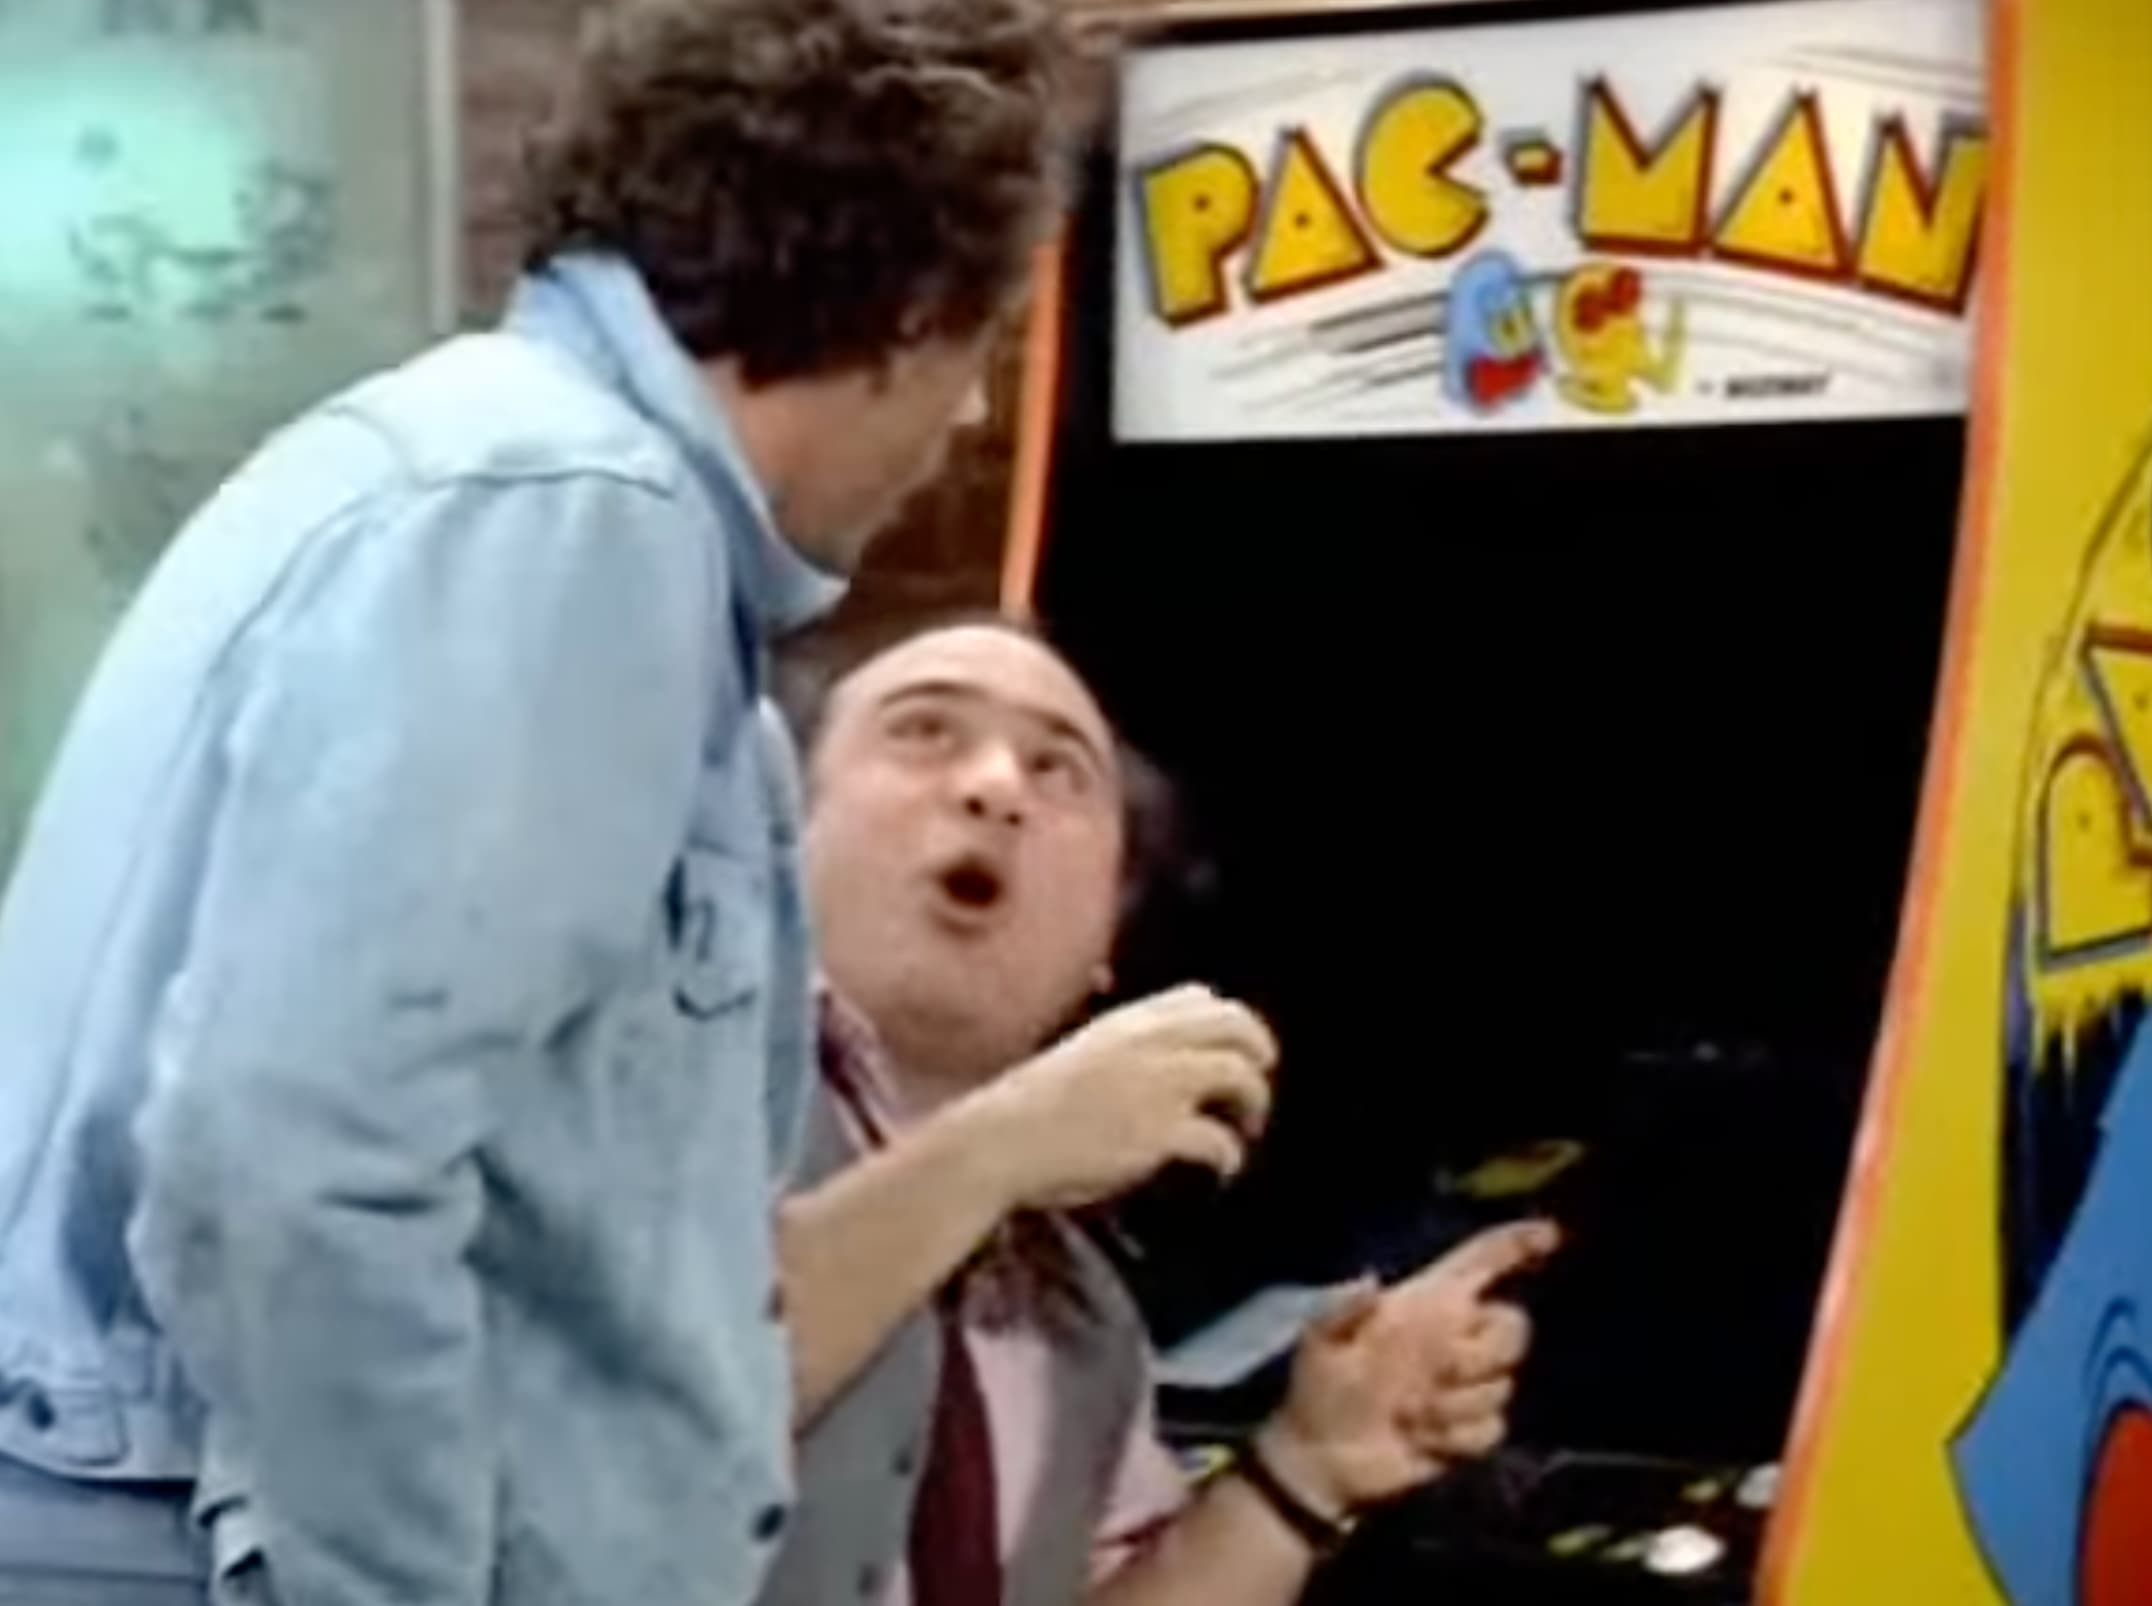 Danny DeVito and Christopher Lloyd argue over a new Pac-Man machine in a 1982 episode of “Taxi.”